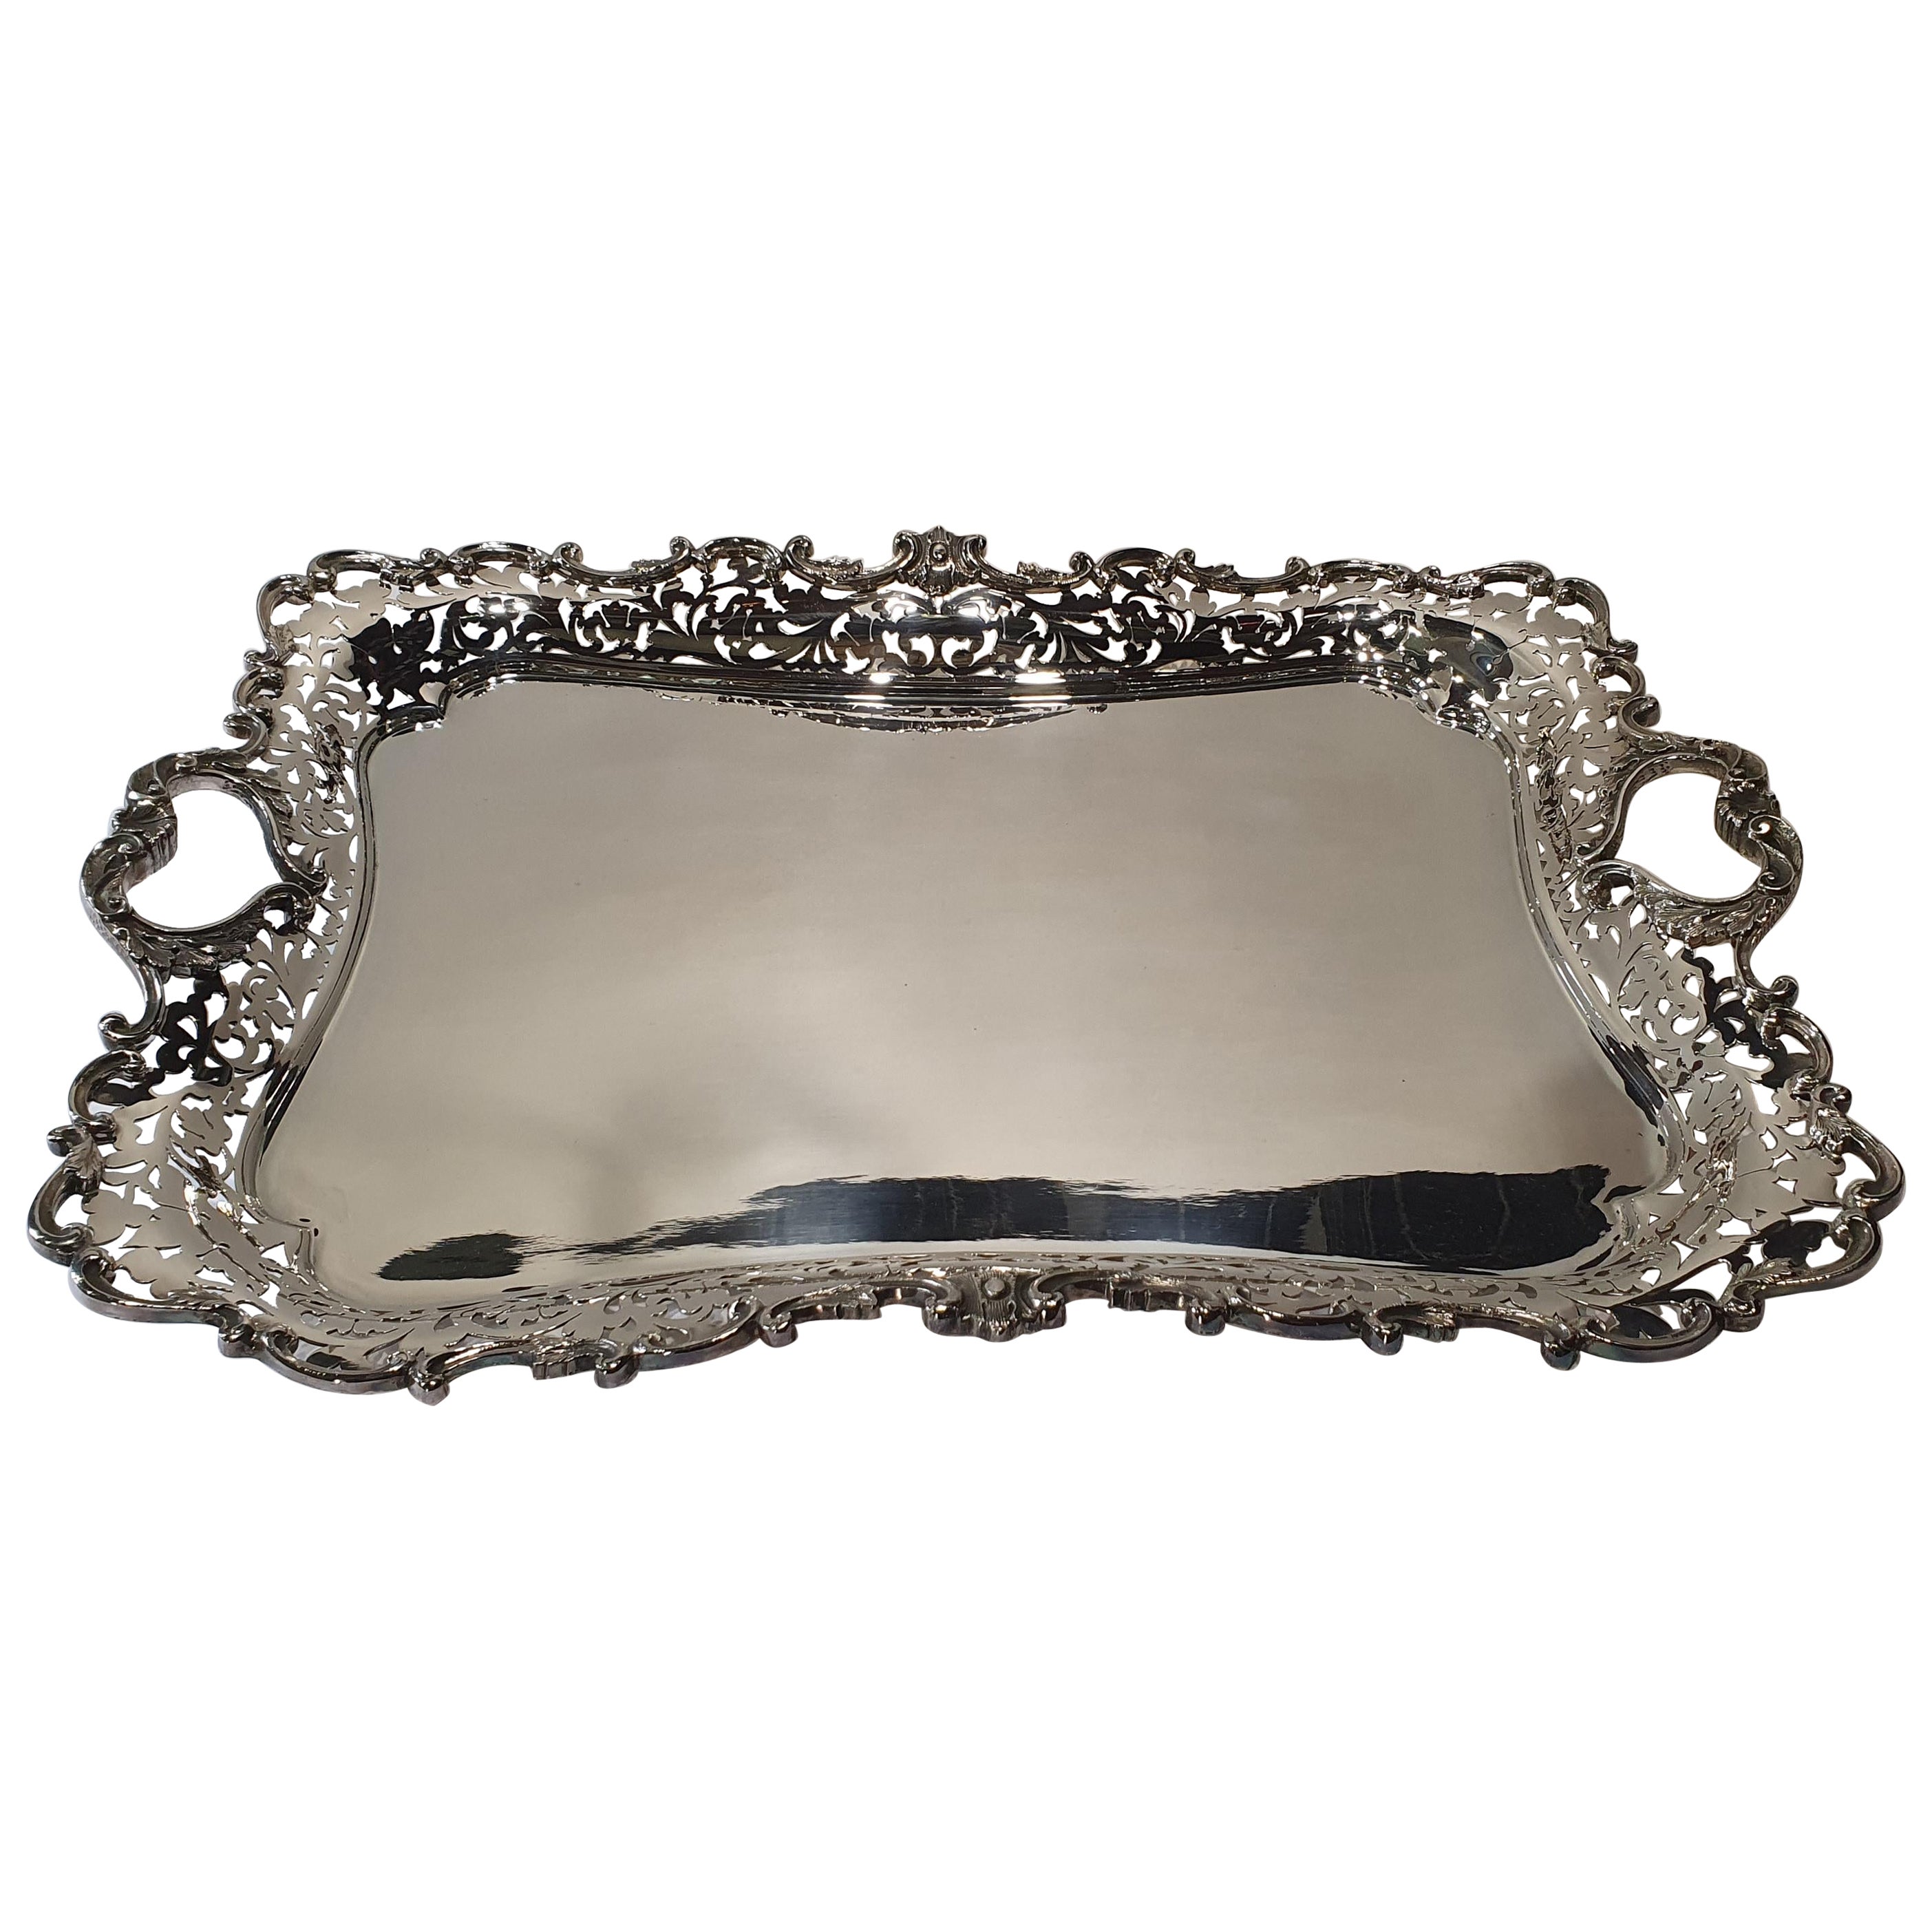 20th Century Pirced Handicraft Sterling Silver Serving Tray, Italy, 1998